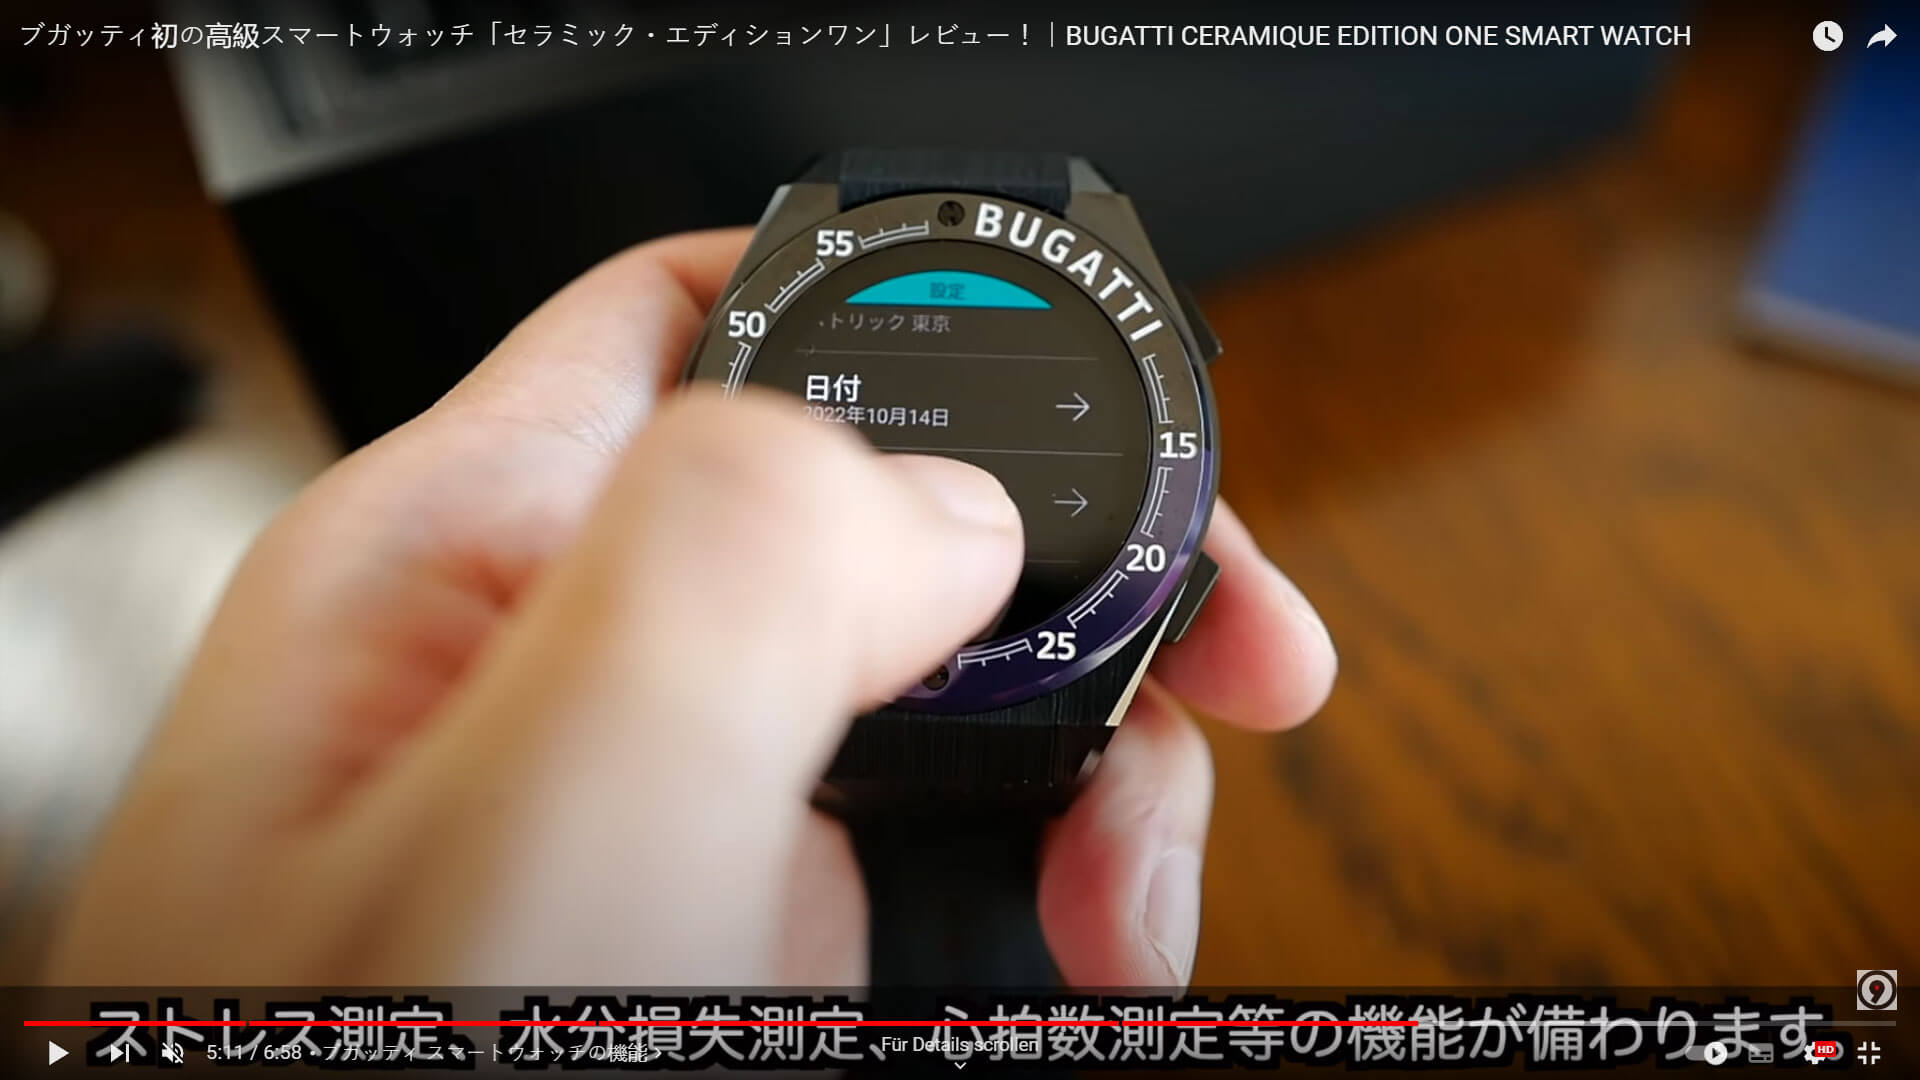 Bugatti Smartwatch review in Japanese